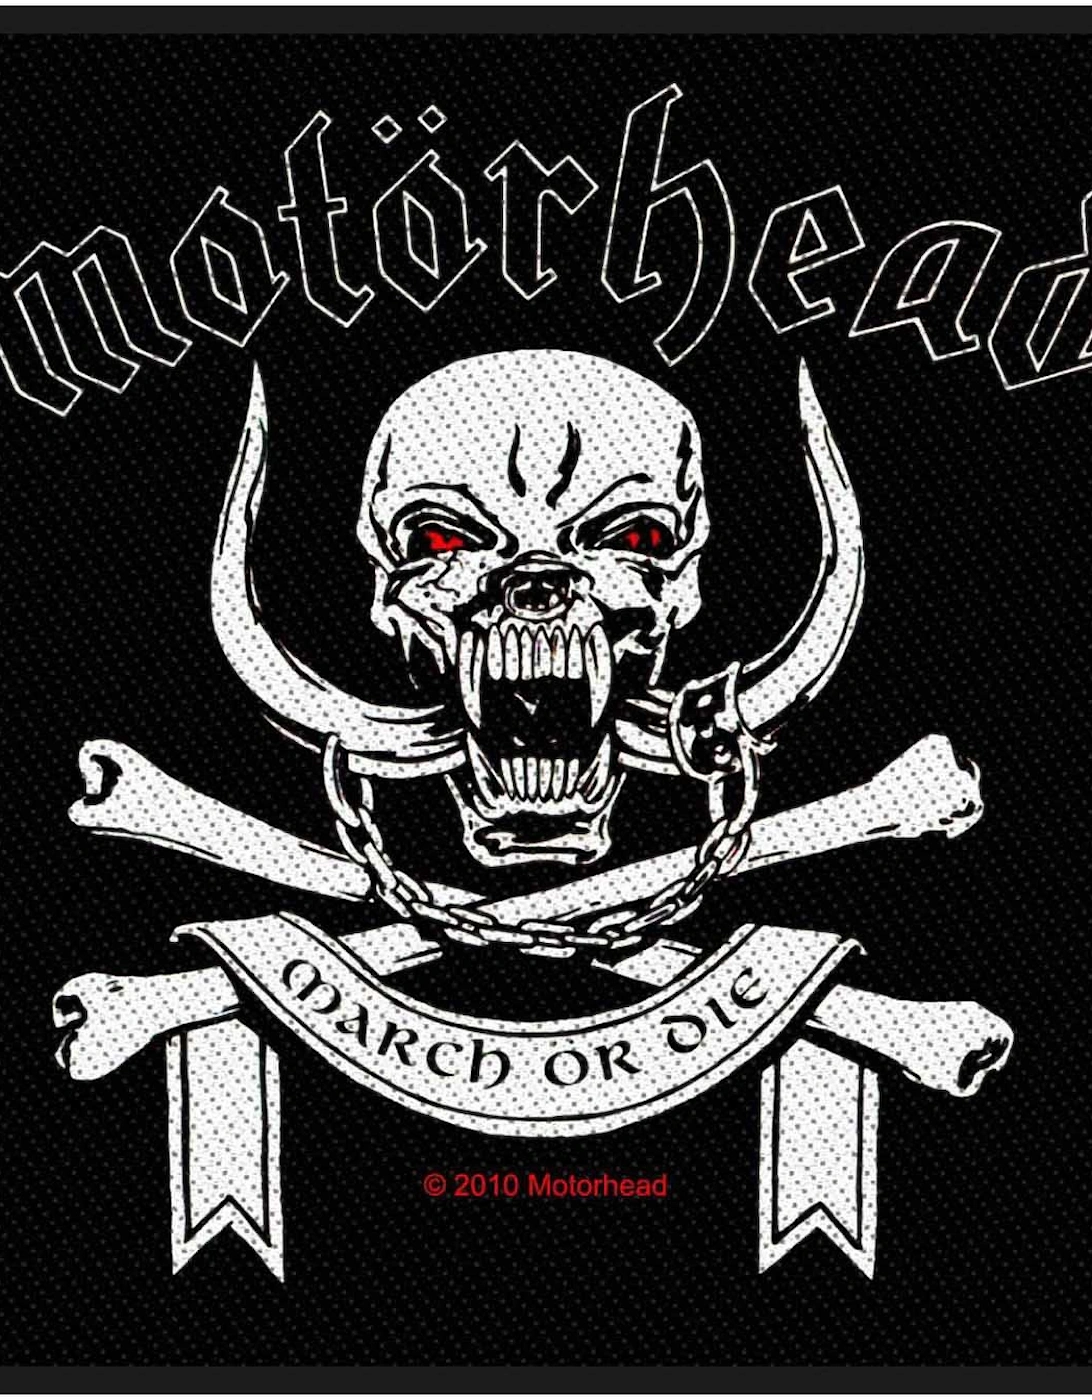 March Or Die Woven Patch, 2 of 1